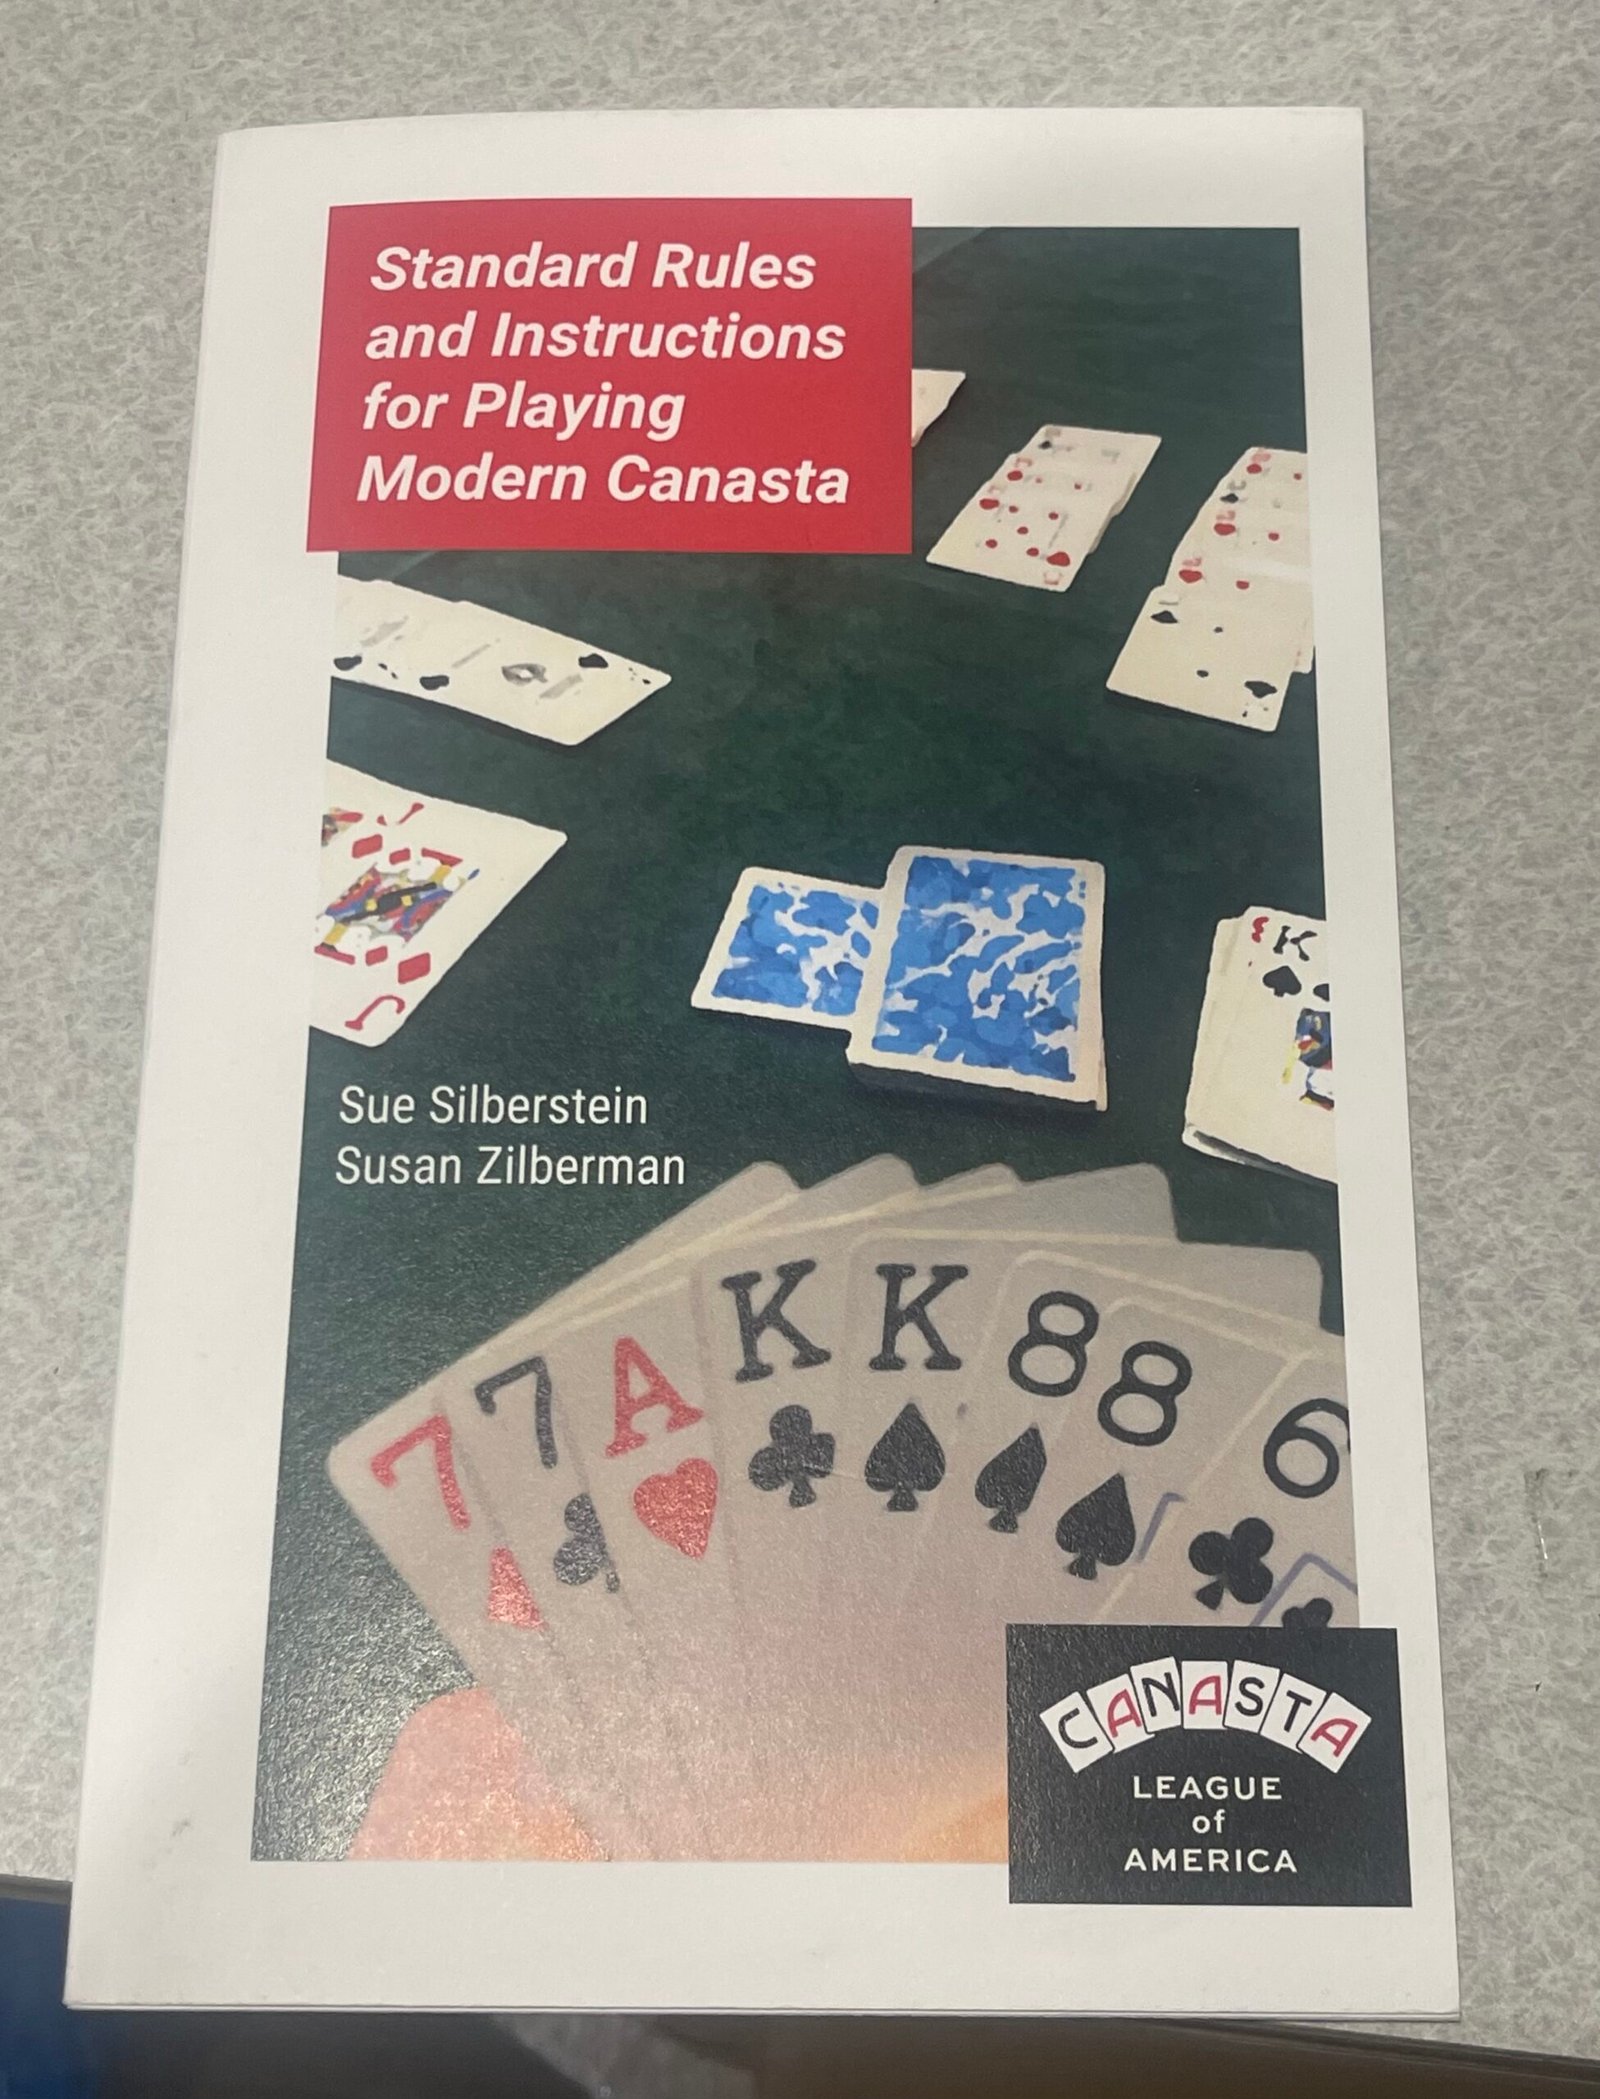 canasta-league-of-america-standard-rules-instructions-for-playing-modern-canasta-mahjongg